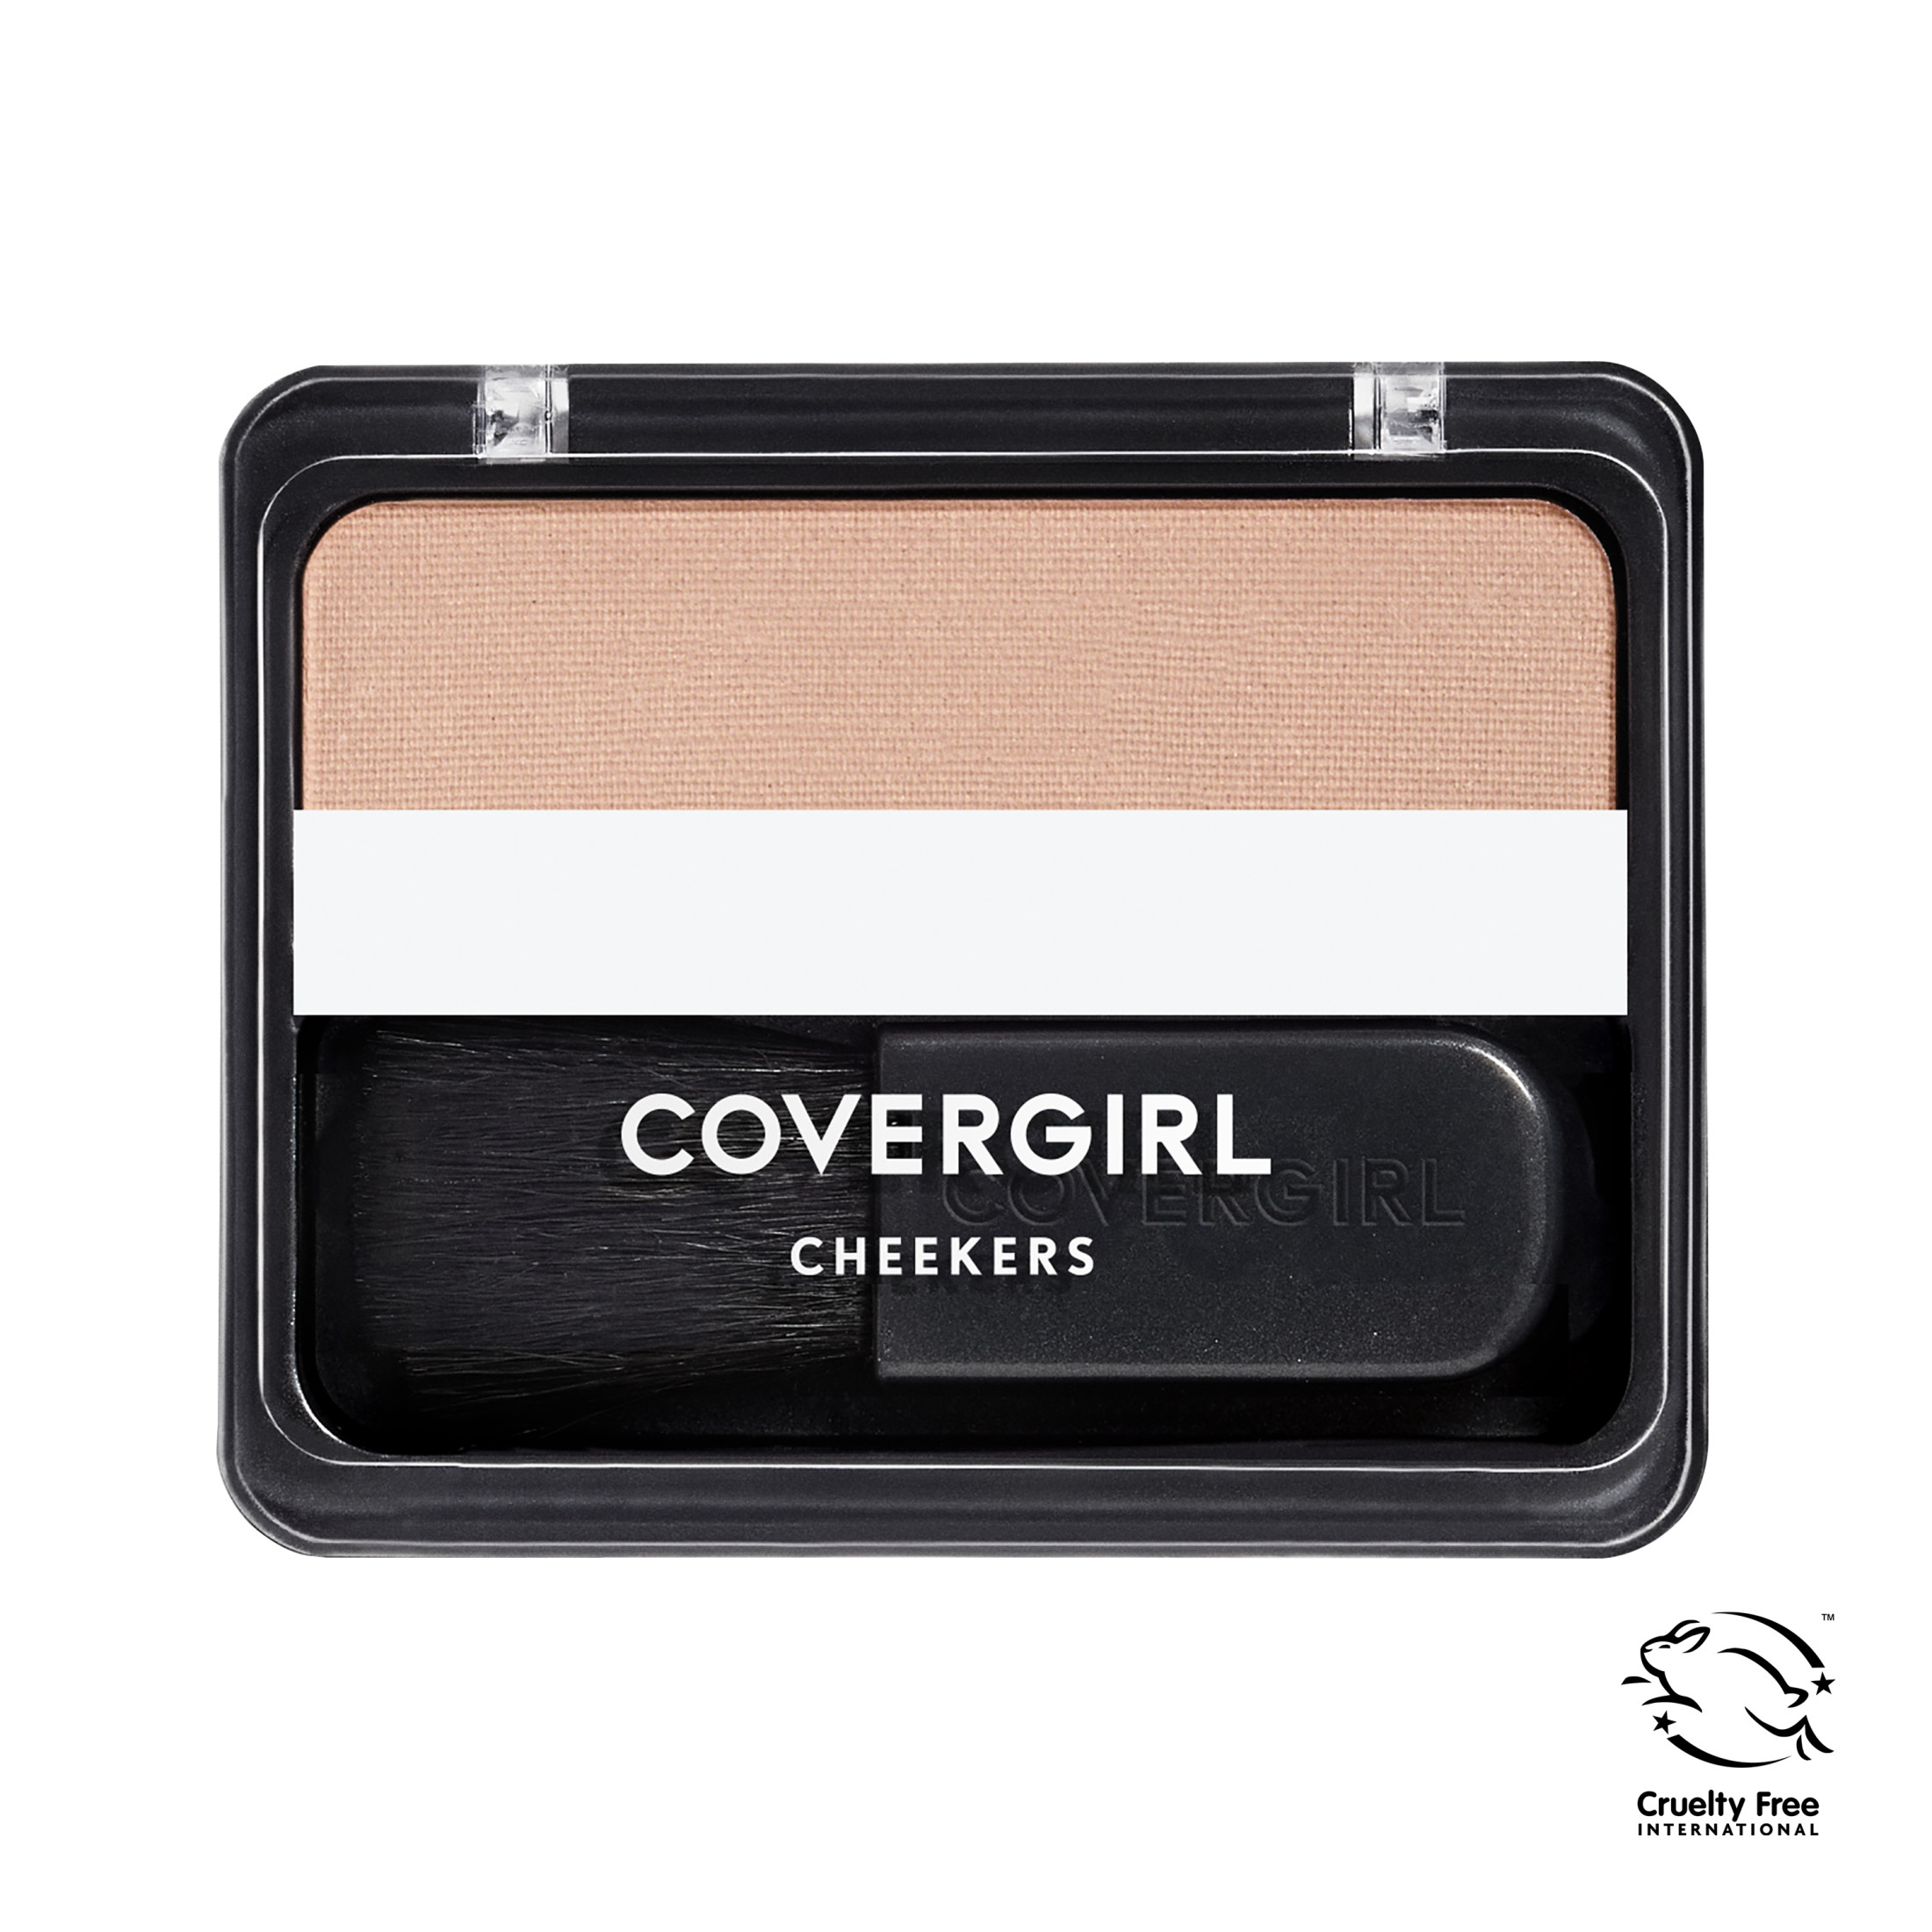 COVERGIRL Cheekers Blendable Powder Blush, 103 Natural Shimmer, 0.12 oz - image 2 of 9